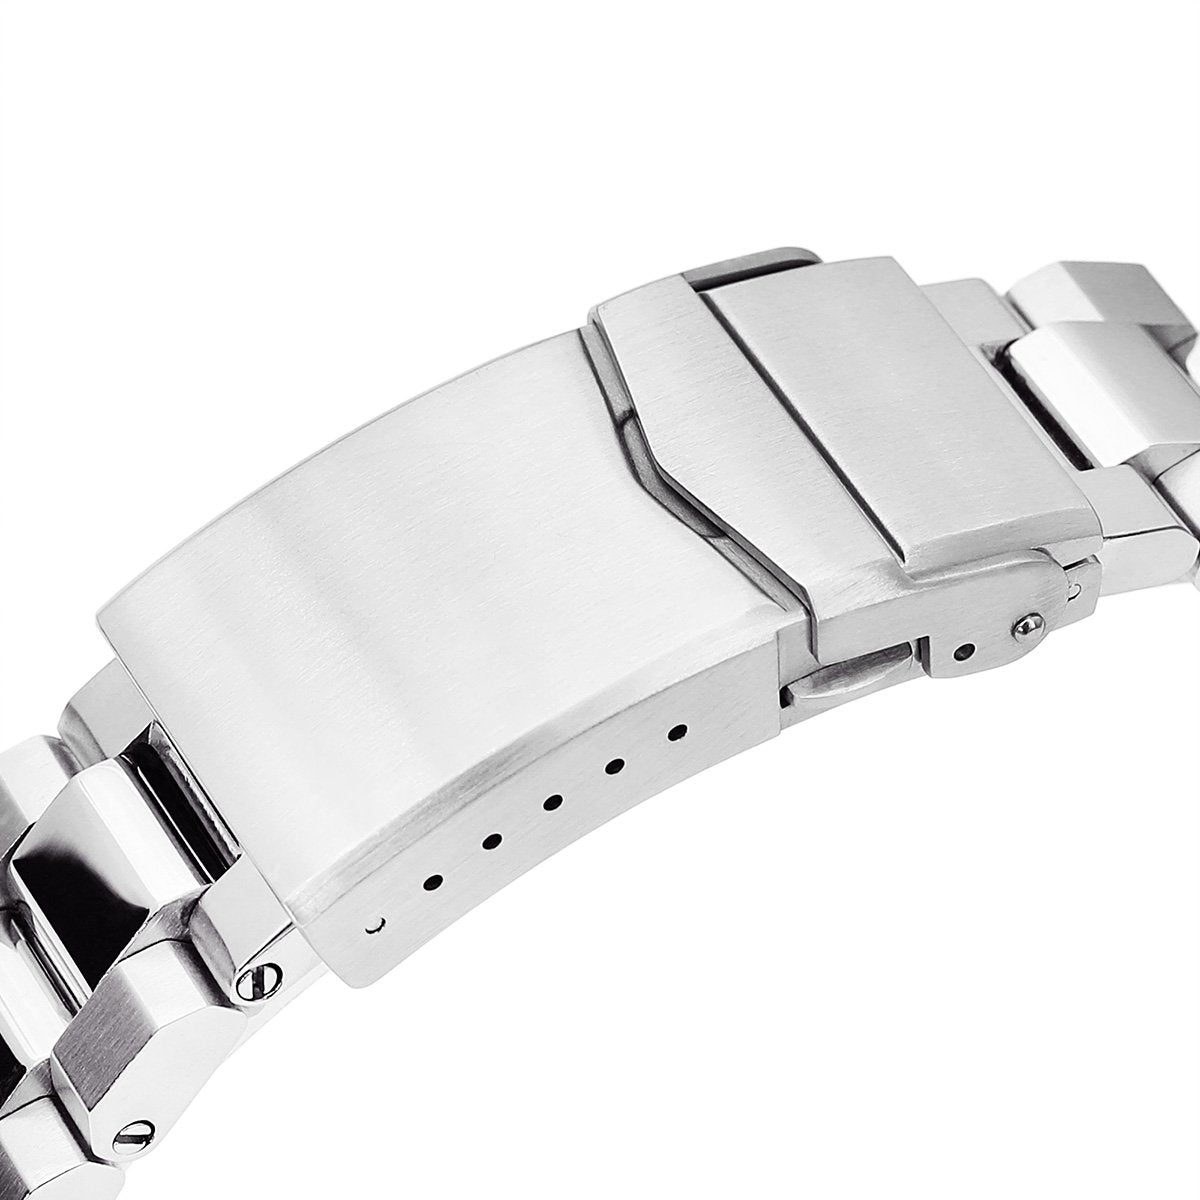 22mm Hexad 316L Stainless Steel Watch Bracelet for Seiko Samurai SRPB51 Brushed and Polished V-Clasp Strapcode Watch Bands